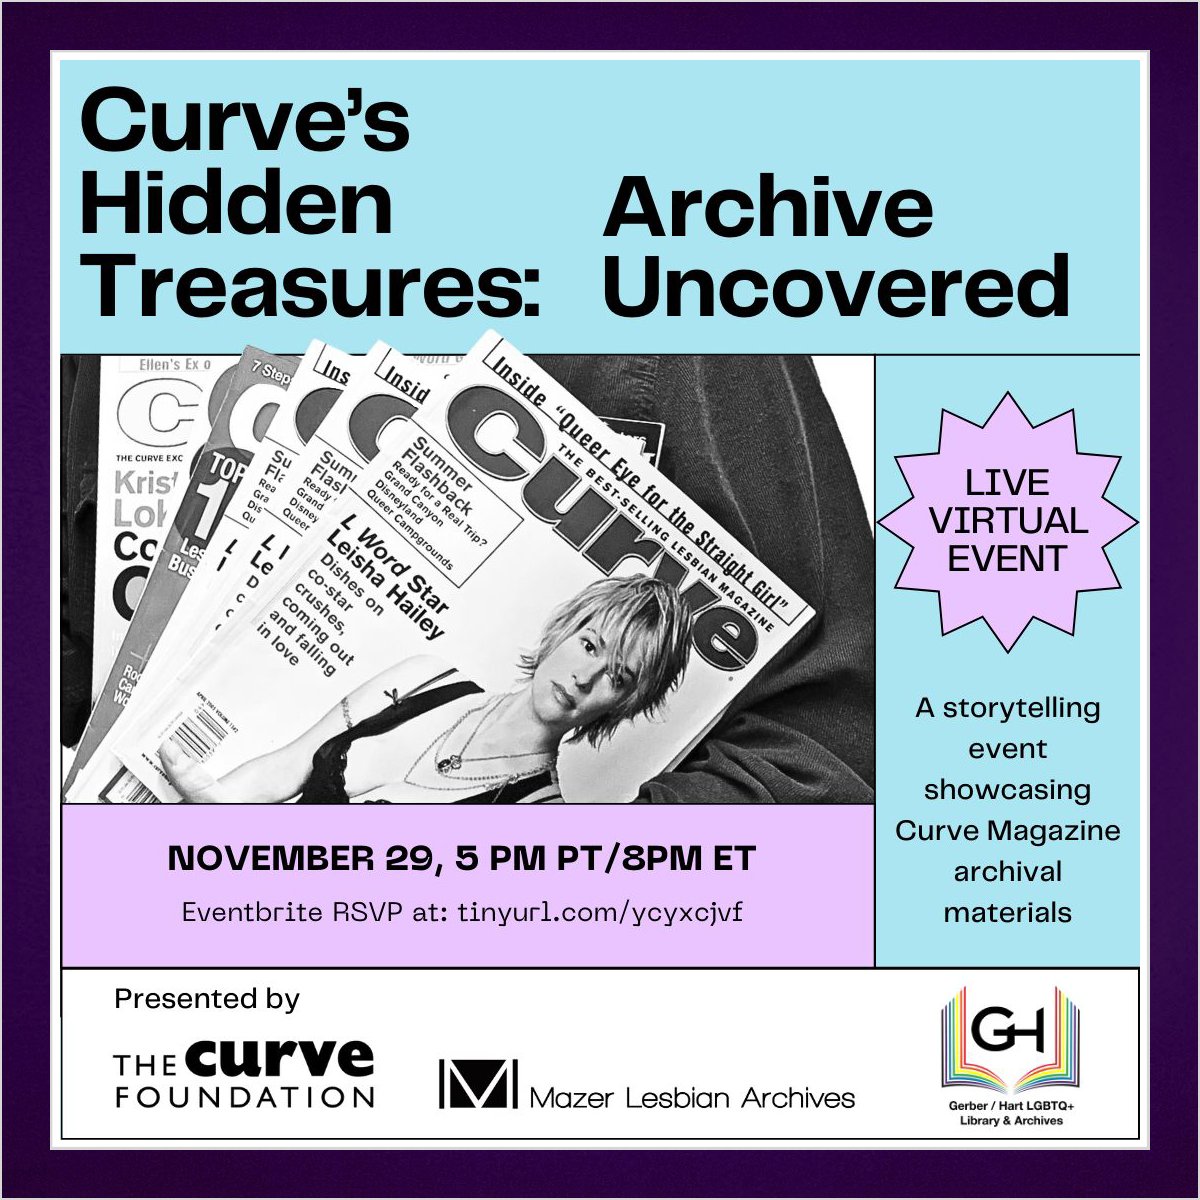 ⏰ There's still time to RSVP for tonight's FREE virtual event, showcasing Curve's archival materials housed at The June Mazer Lesbian Archives, Gerber/Hart Library & Archives, and from Franco's own collection! 💜 WHEN: Wed, Nov 29, 5pm PT/8pm ET RSVP: 👉 tinyurl.com/ycyxcjvf